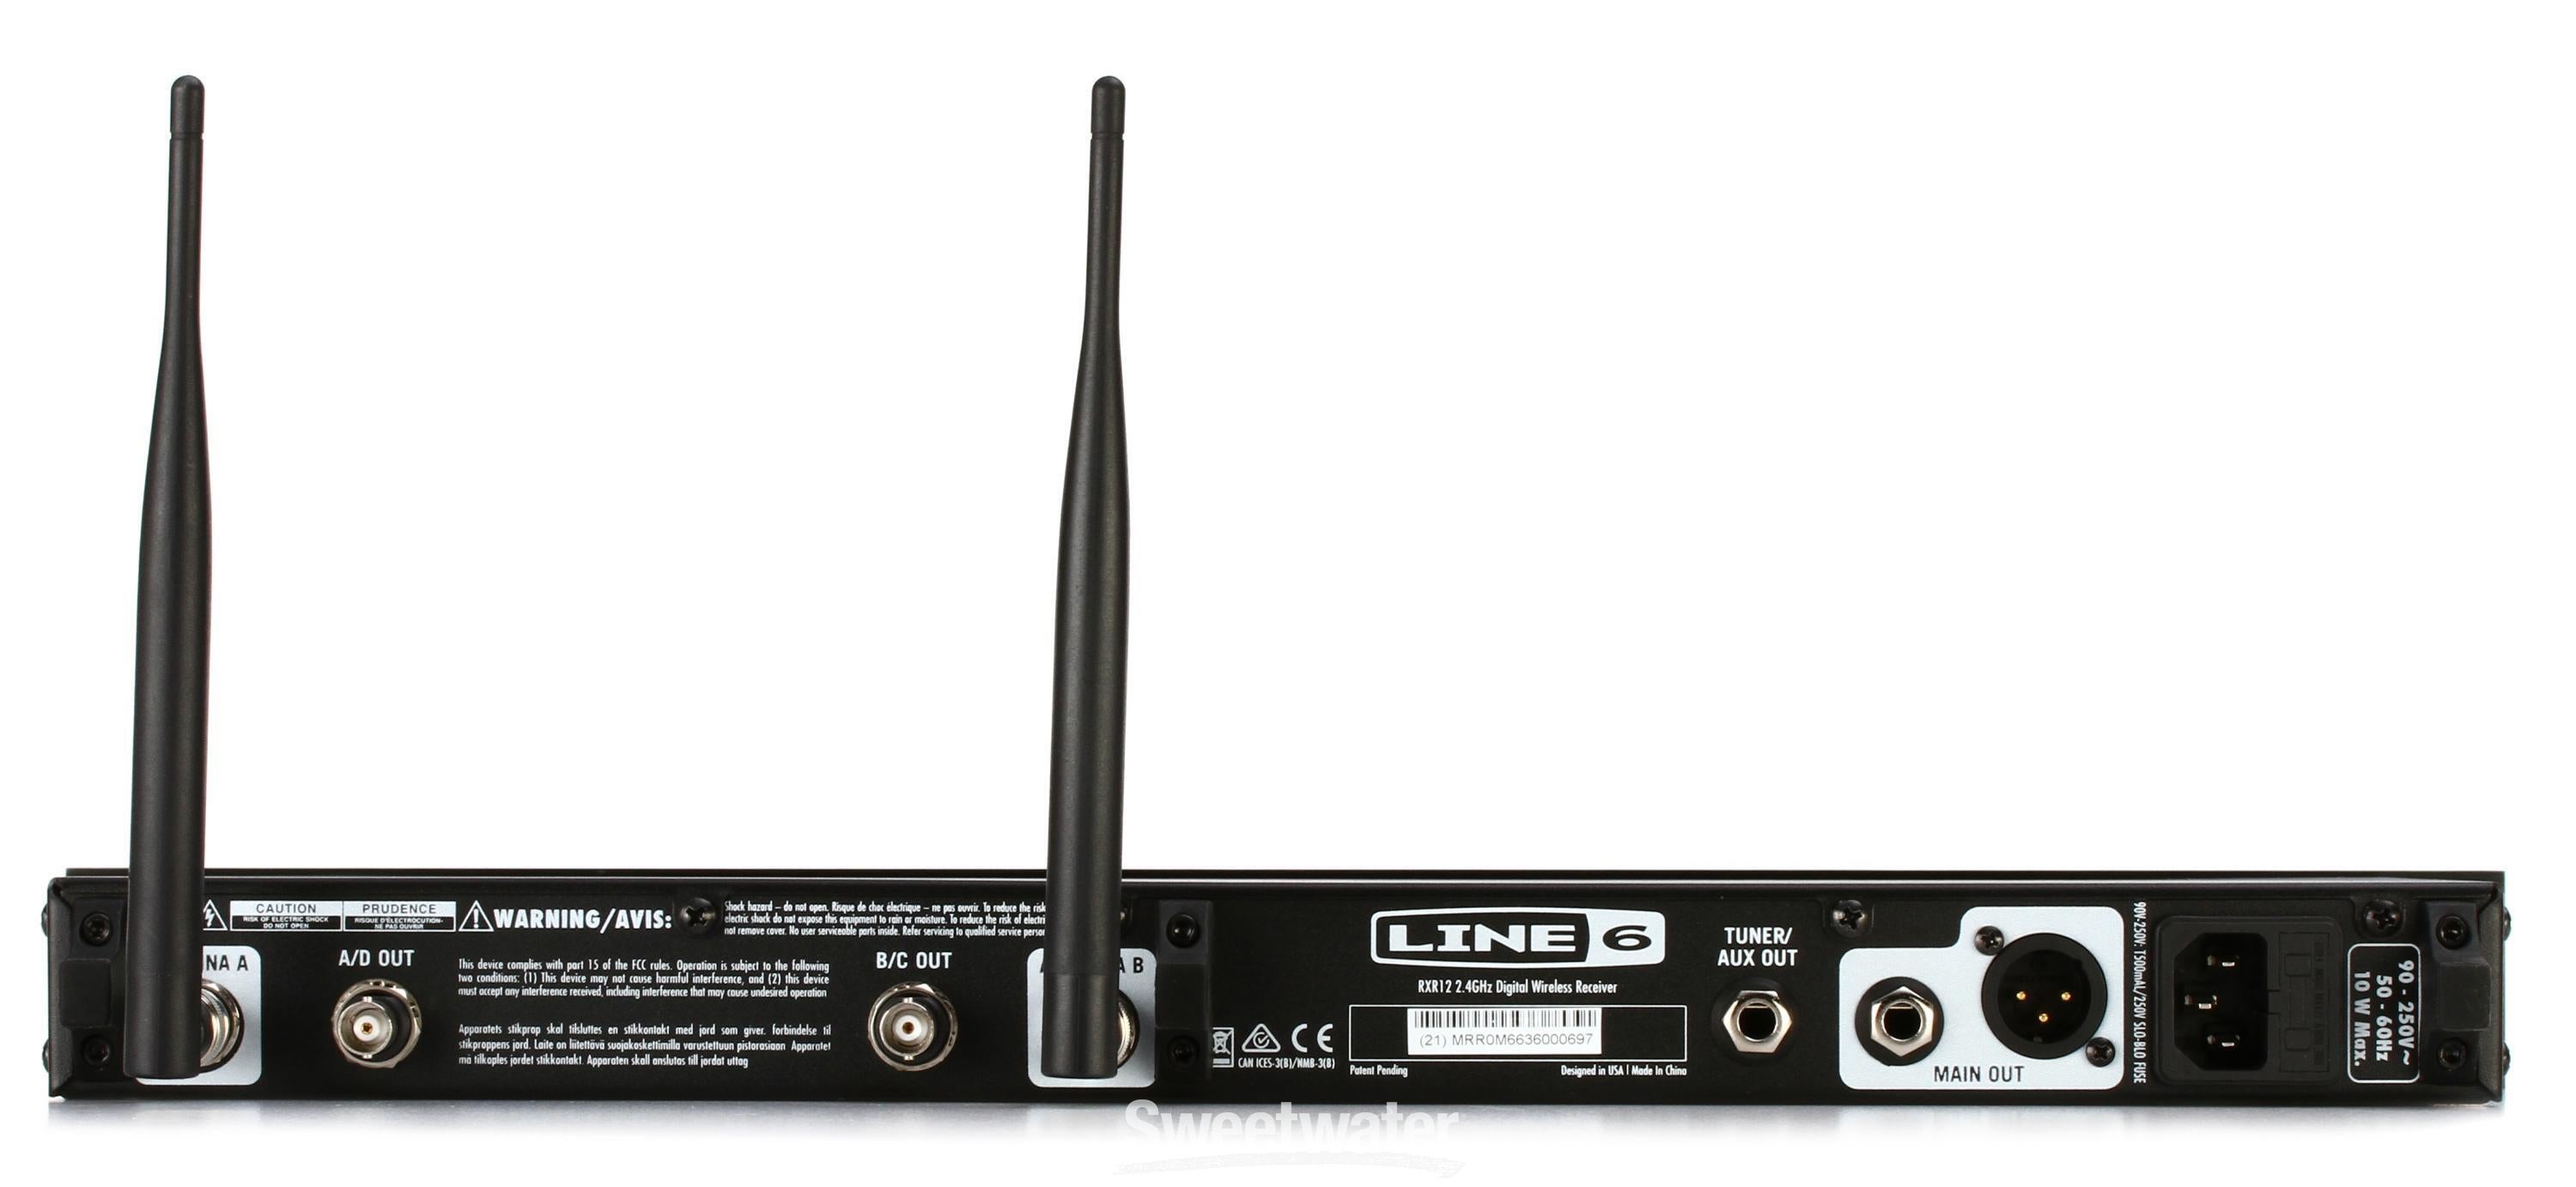 Line 6 Relay G90 Digital Wireless Guitar System | Sweetwater